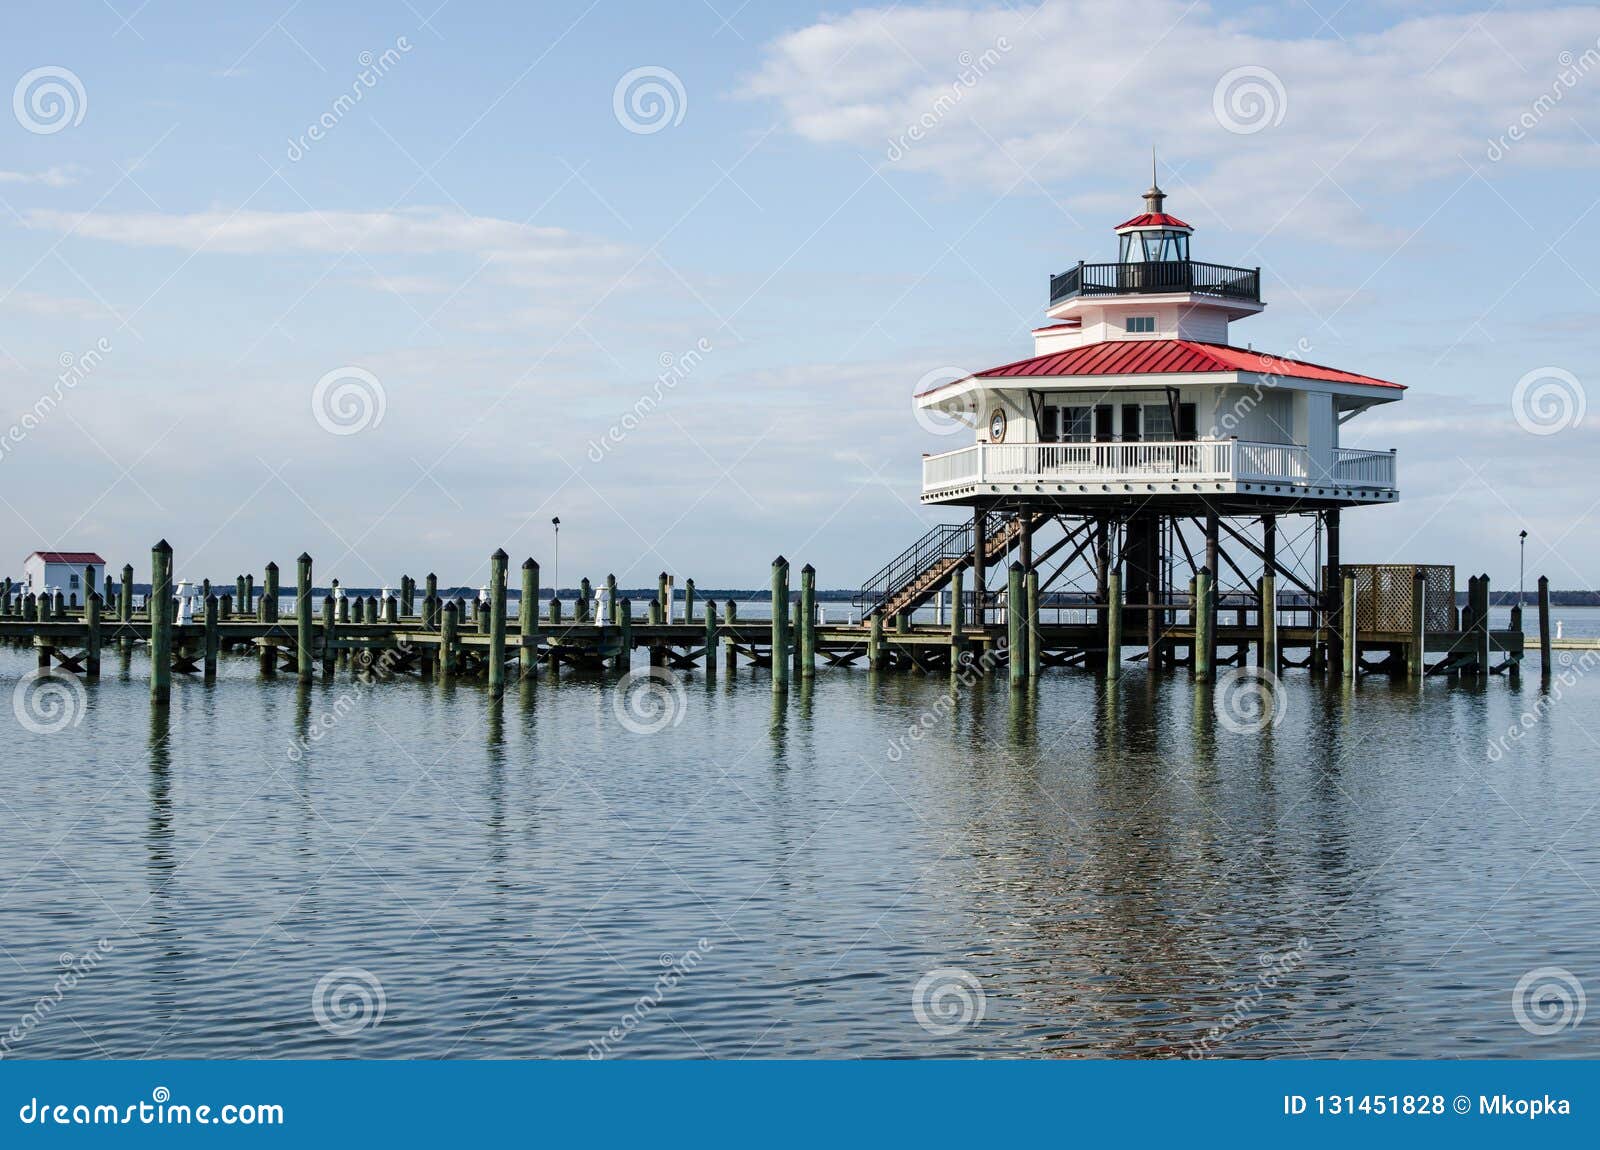 choptank river lighthouse in cambridge maryland, on maryland`s eastern shore also known as delmarva